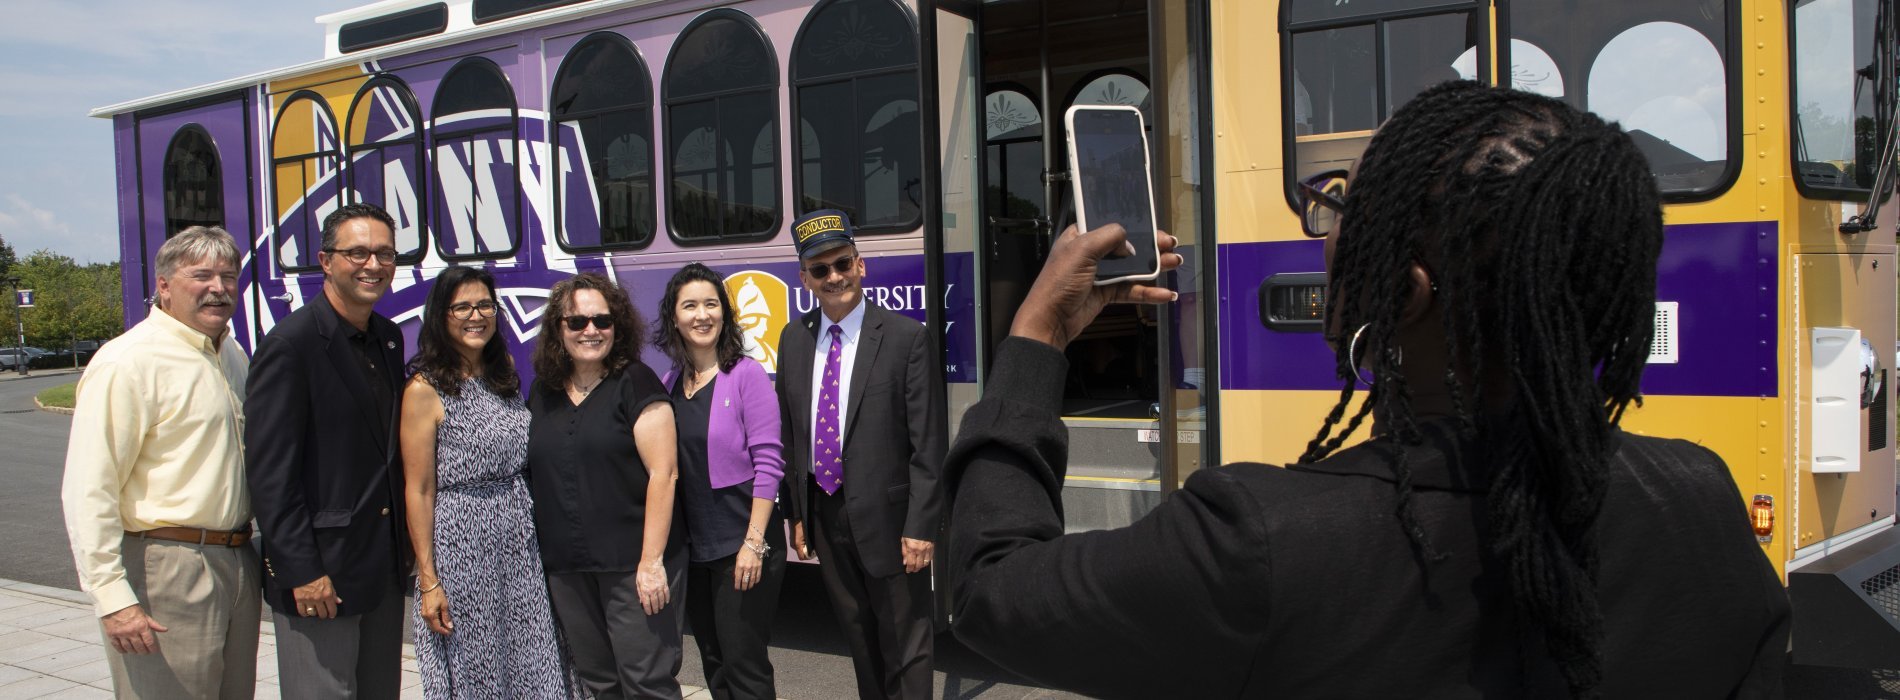 Members of the Executive Council in front of the UAlbany trolley